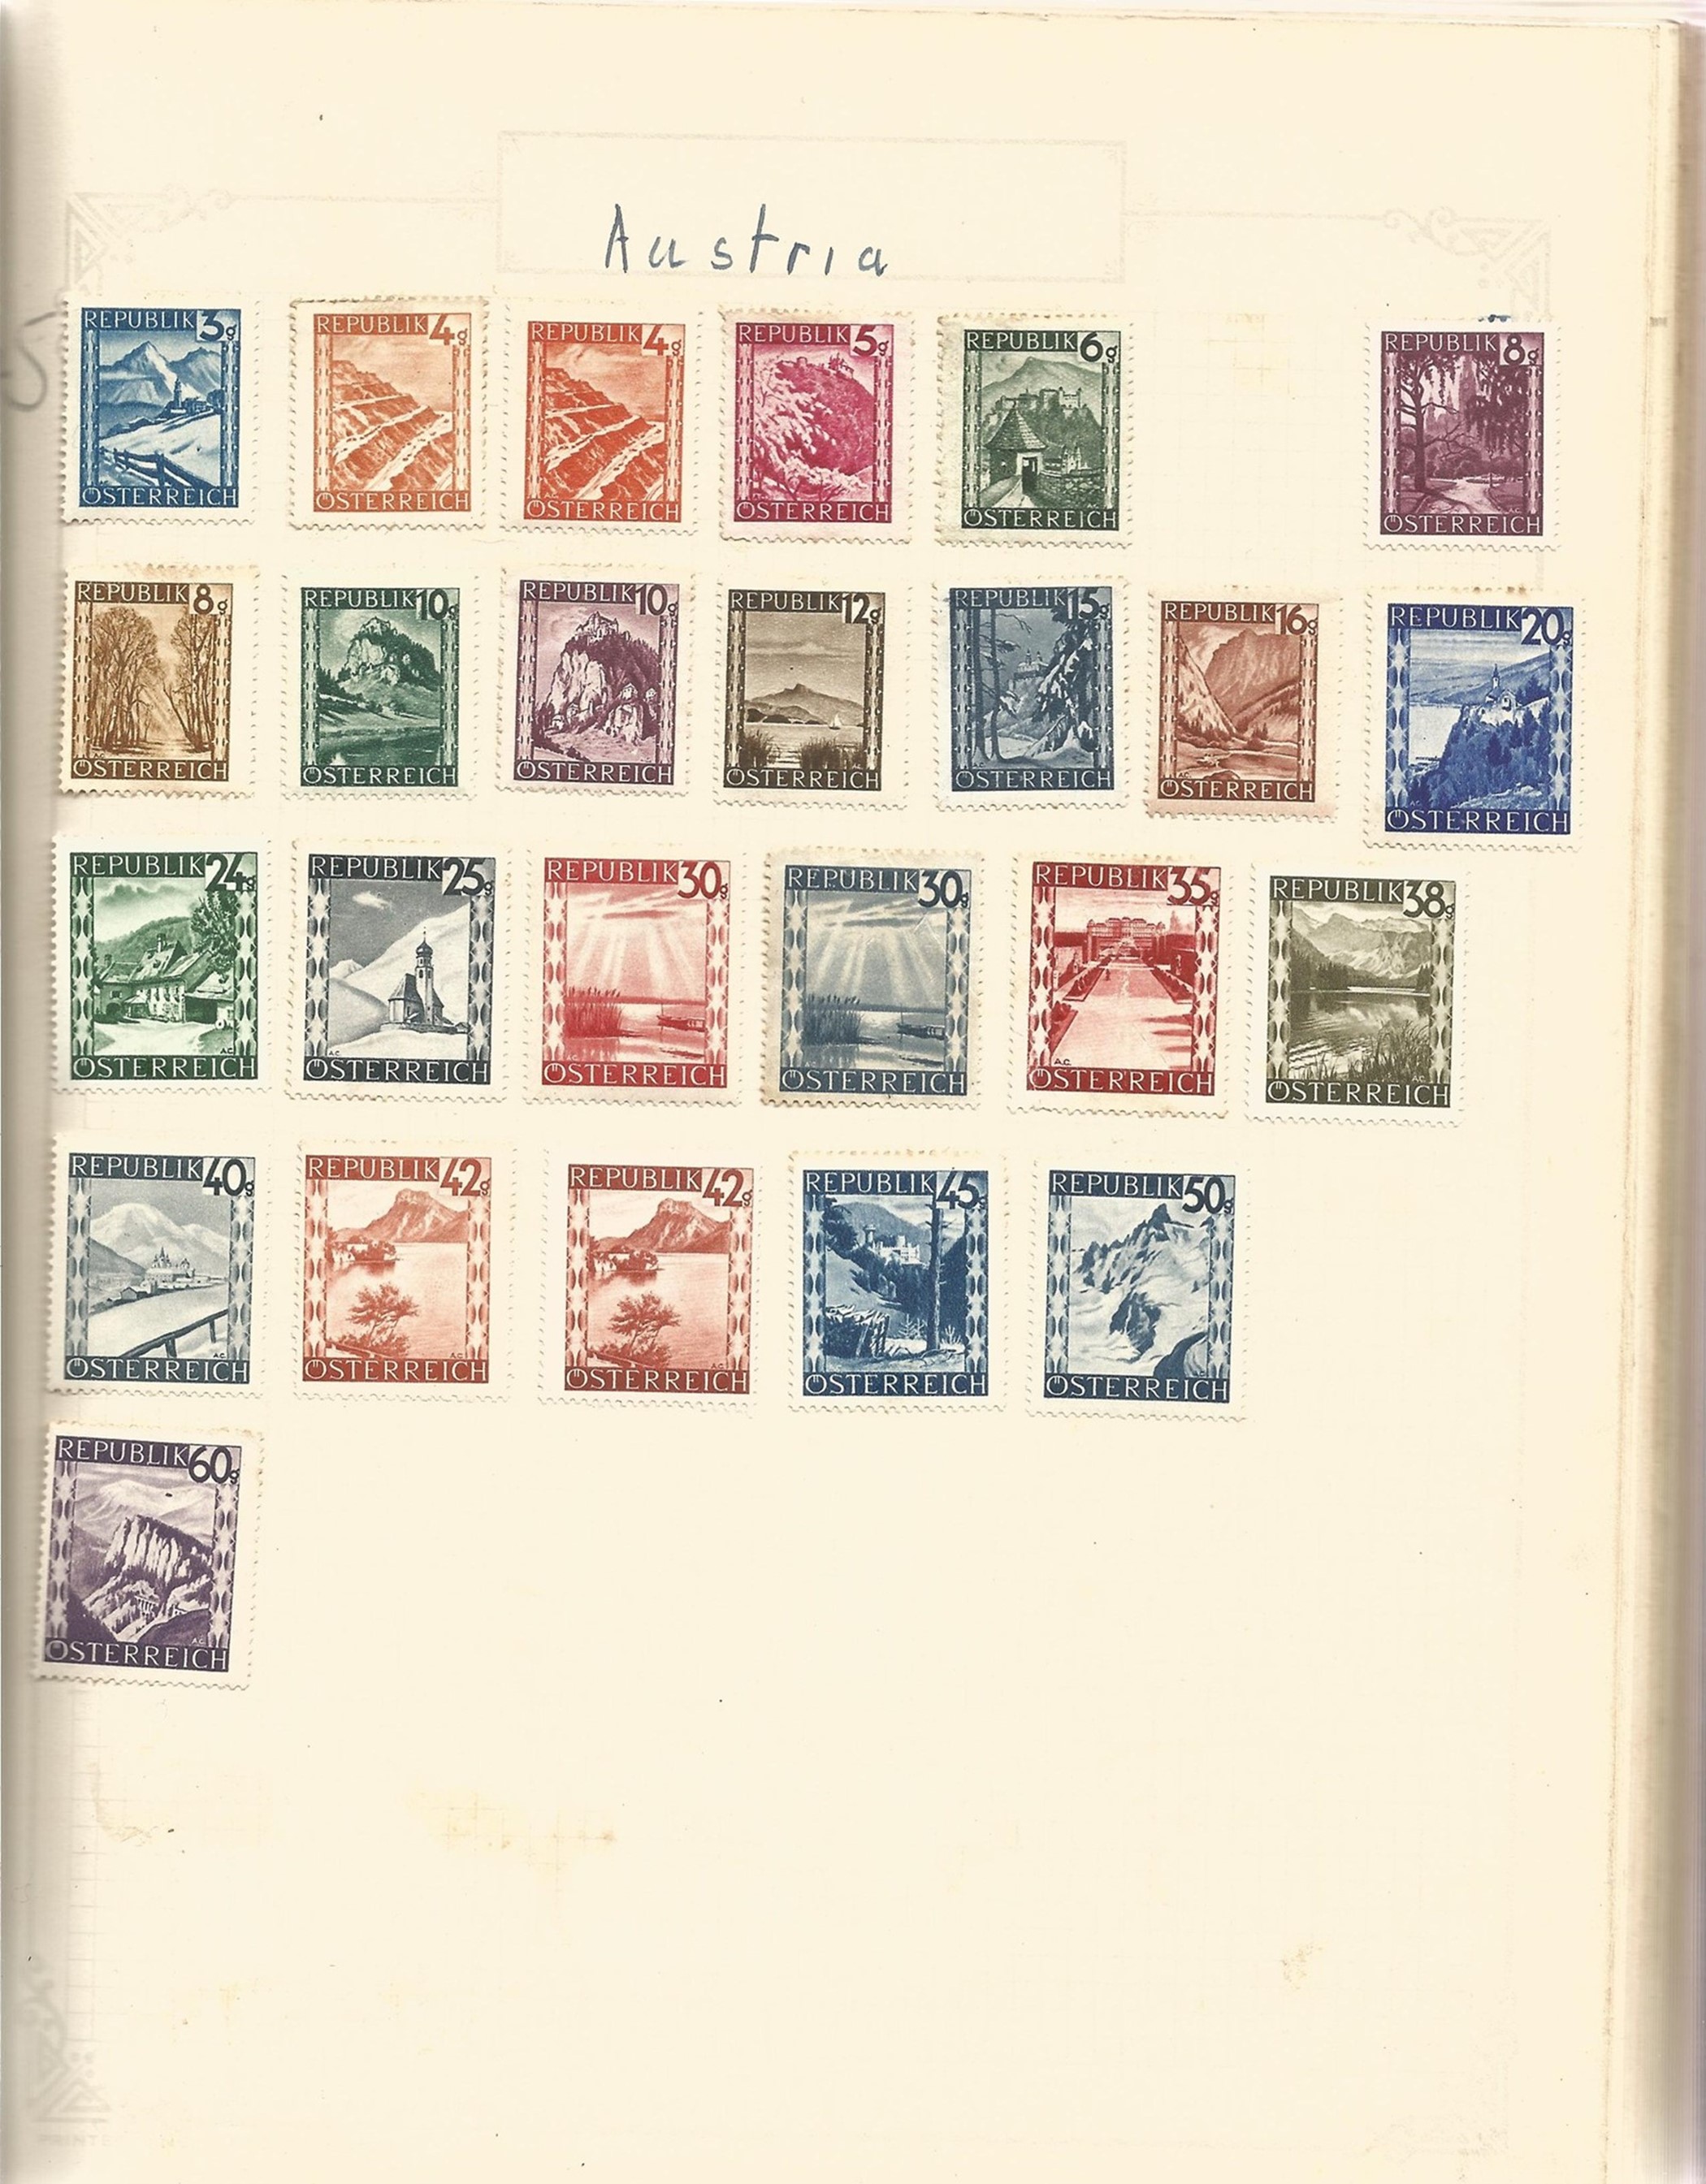 Austria (some Azores) mint & used in Album and Stockbook, Album has Stamps from 1850 to 1960s - Image 3 of 7